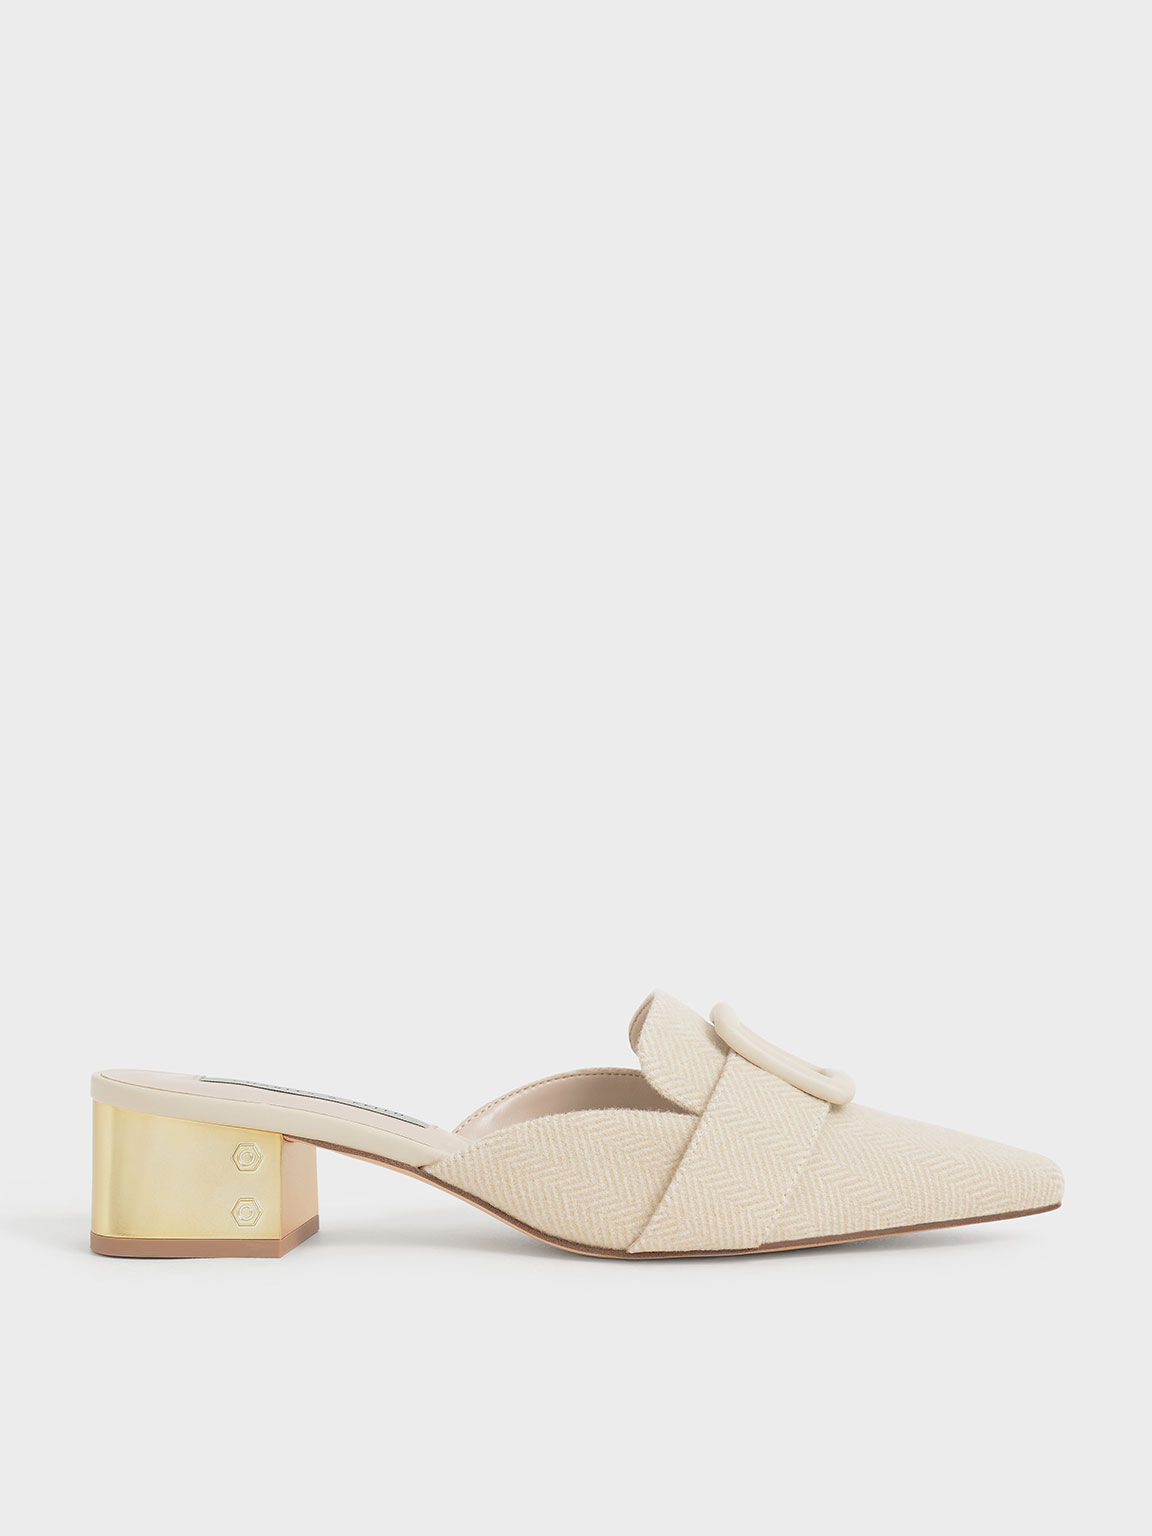 Woven Buckled Mules - Beige